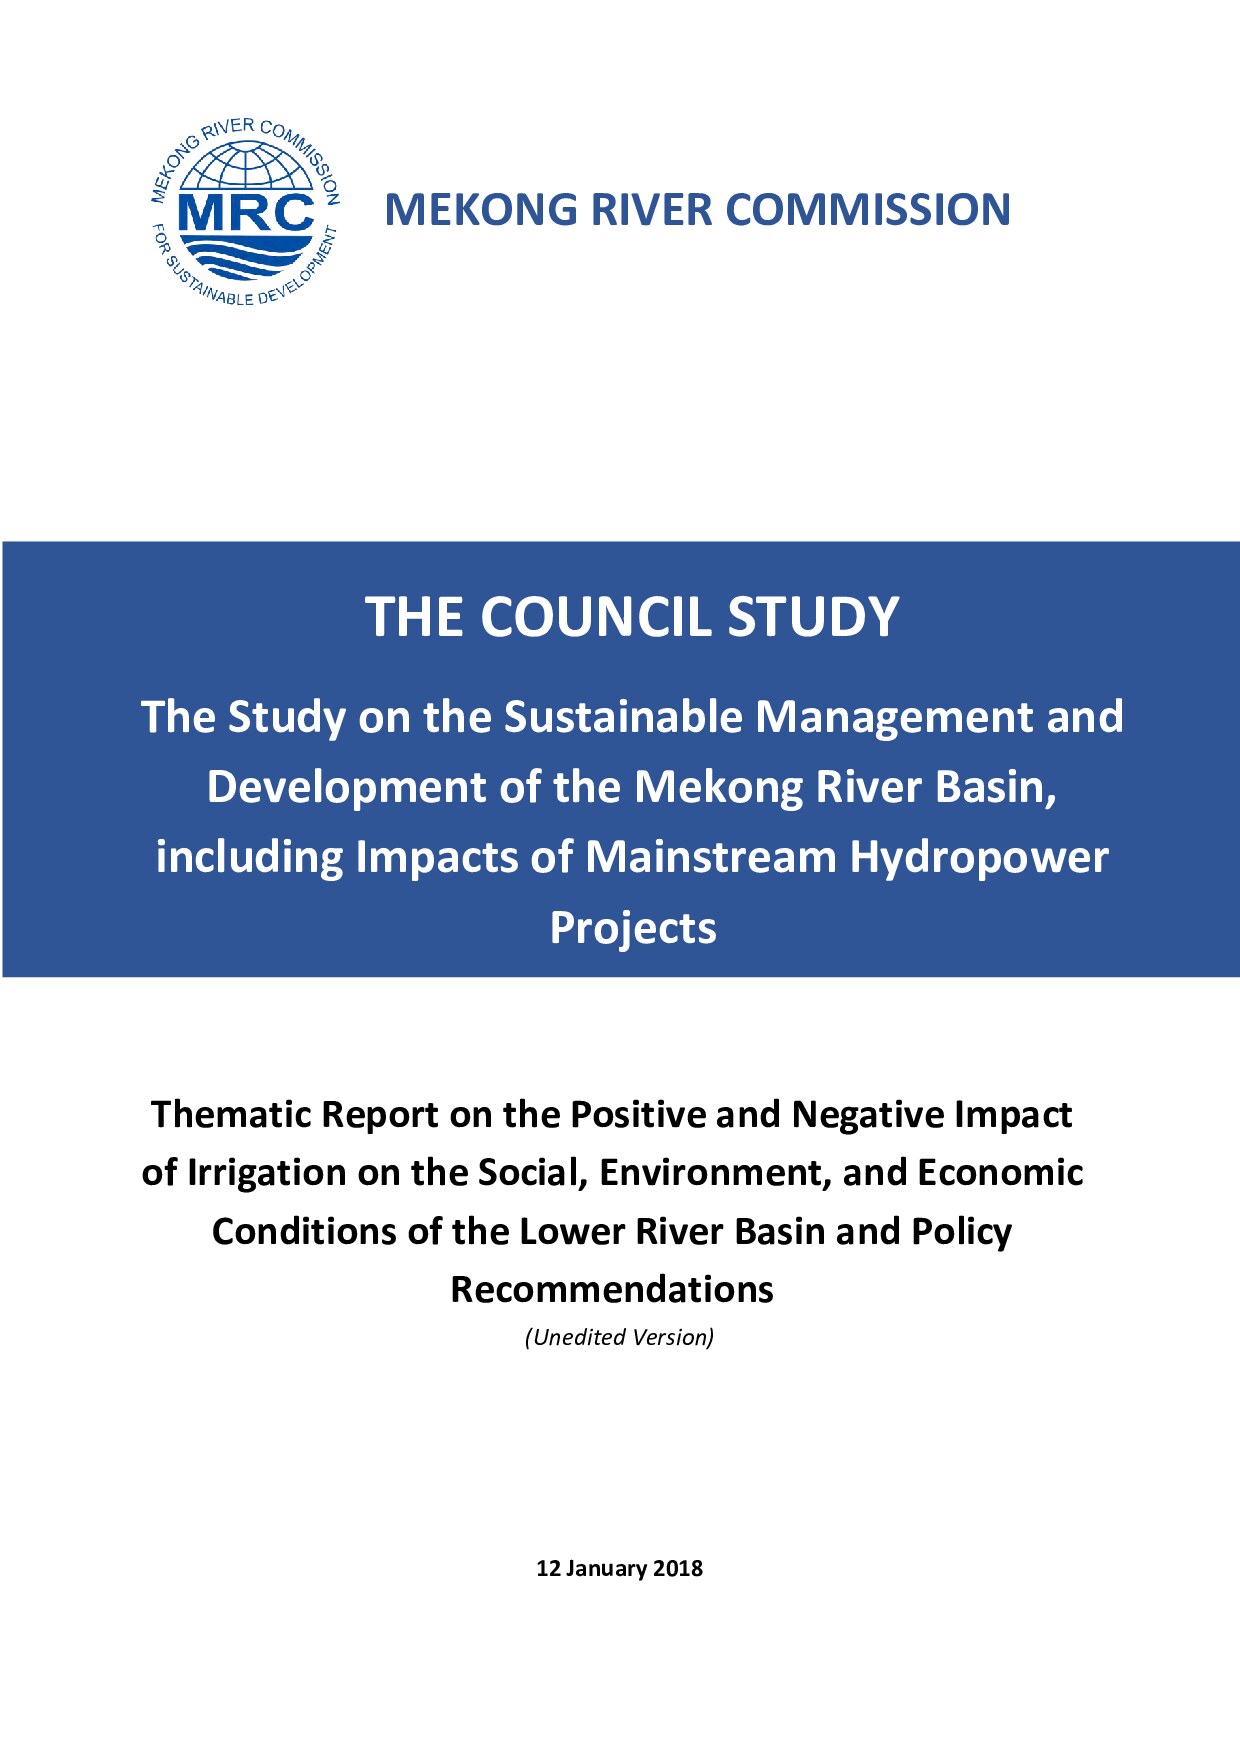 Thematic Report on the Positive and Negative Impact of Irrigation on the Social, Environment, and Economic Conditions of the Lower River Basin and Policy Recommendations